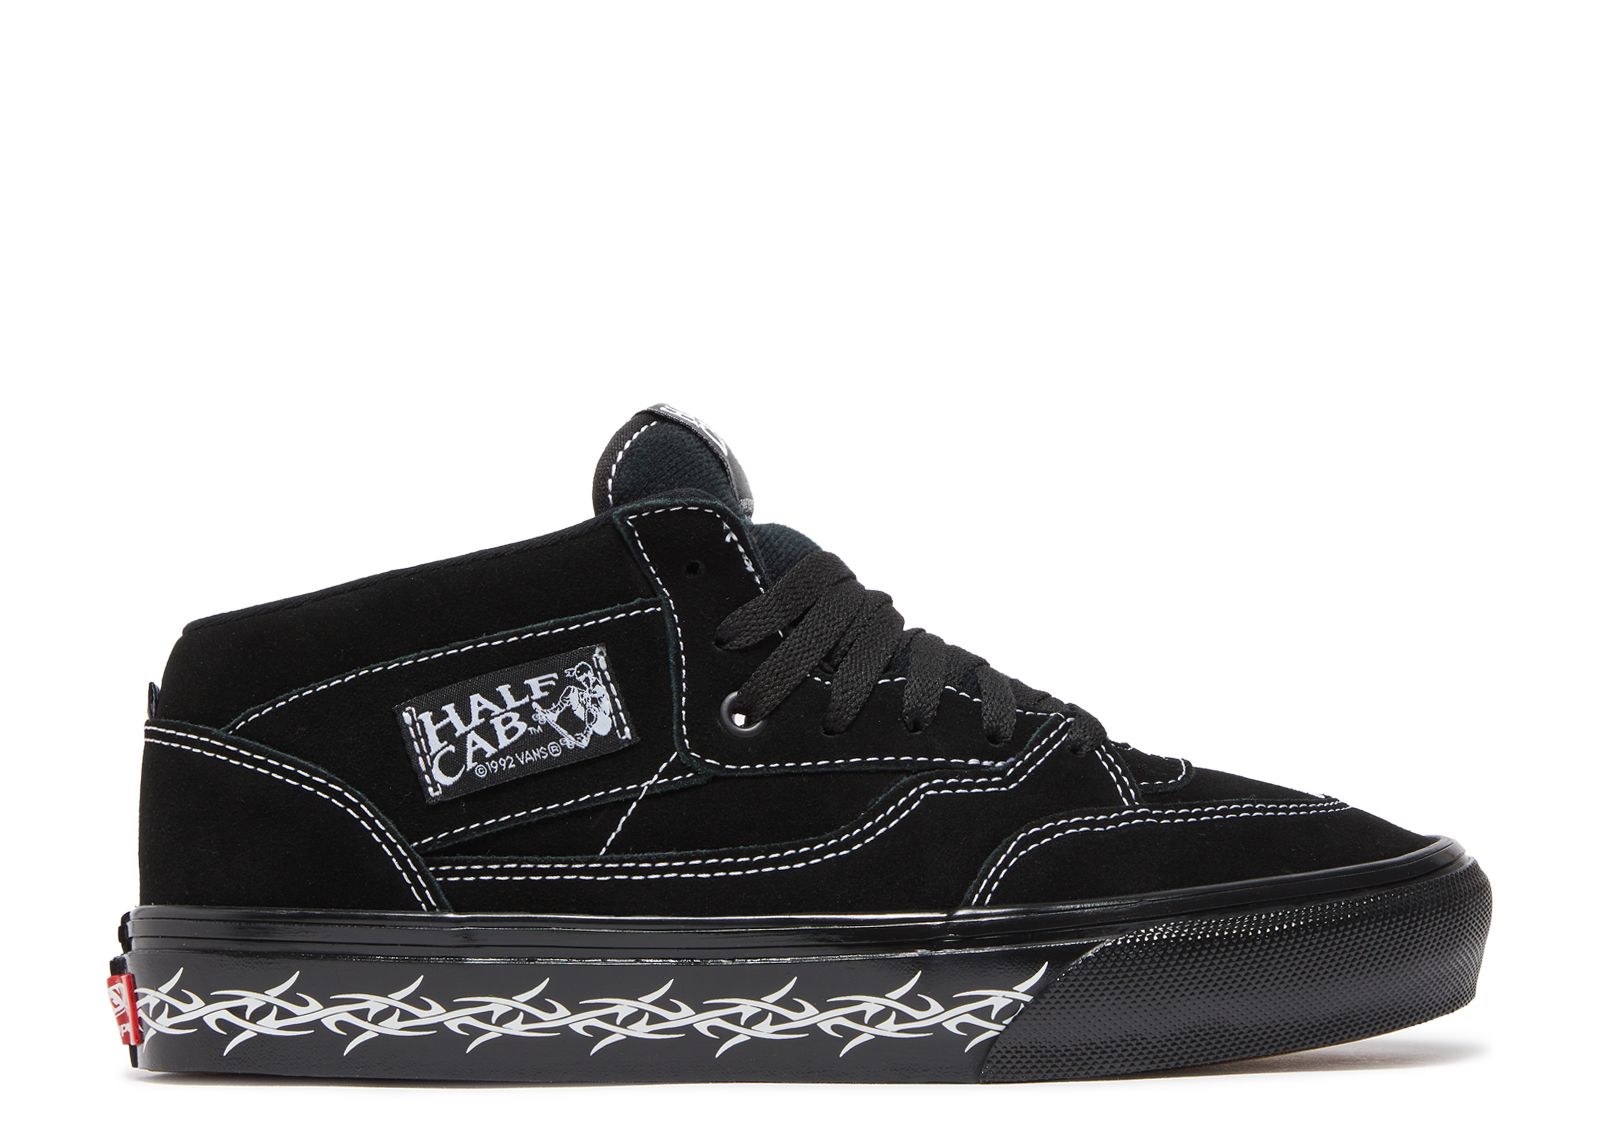 Кроссовки Vans Supreme X Half Cab 'Barbed Wire - Black', черный ce cog 4d barbed suture with l cannula 21g 100mm wire fact lift hilos tensores hskinlift pdo molding fishbone mono thread